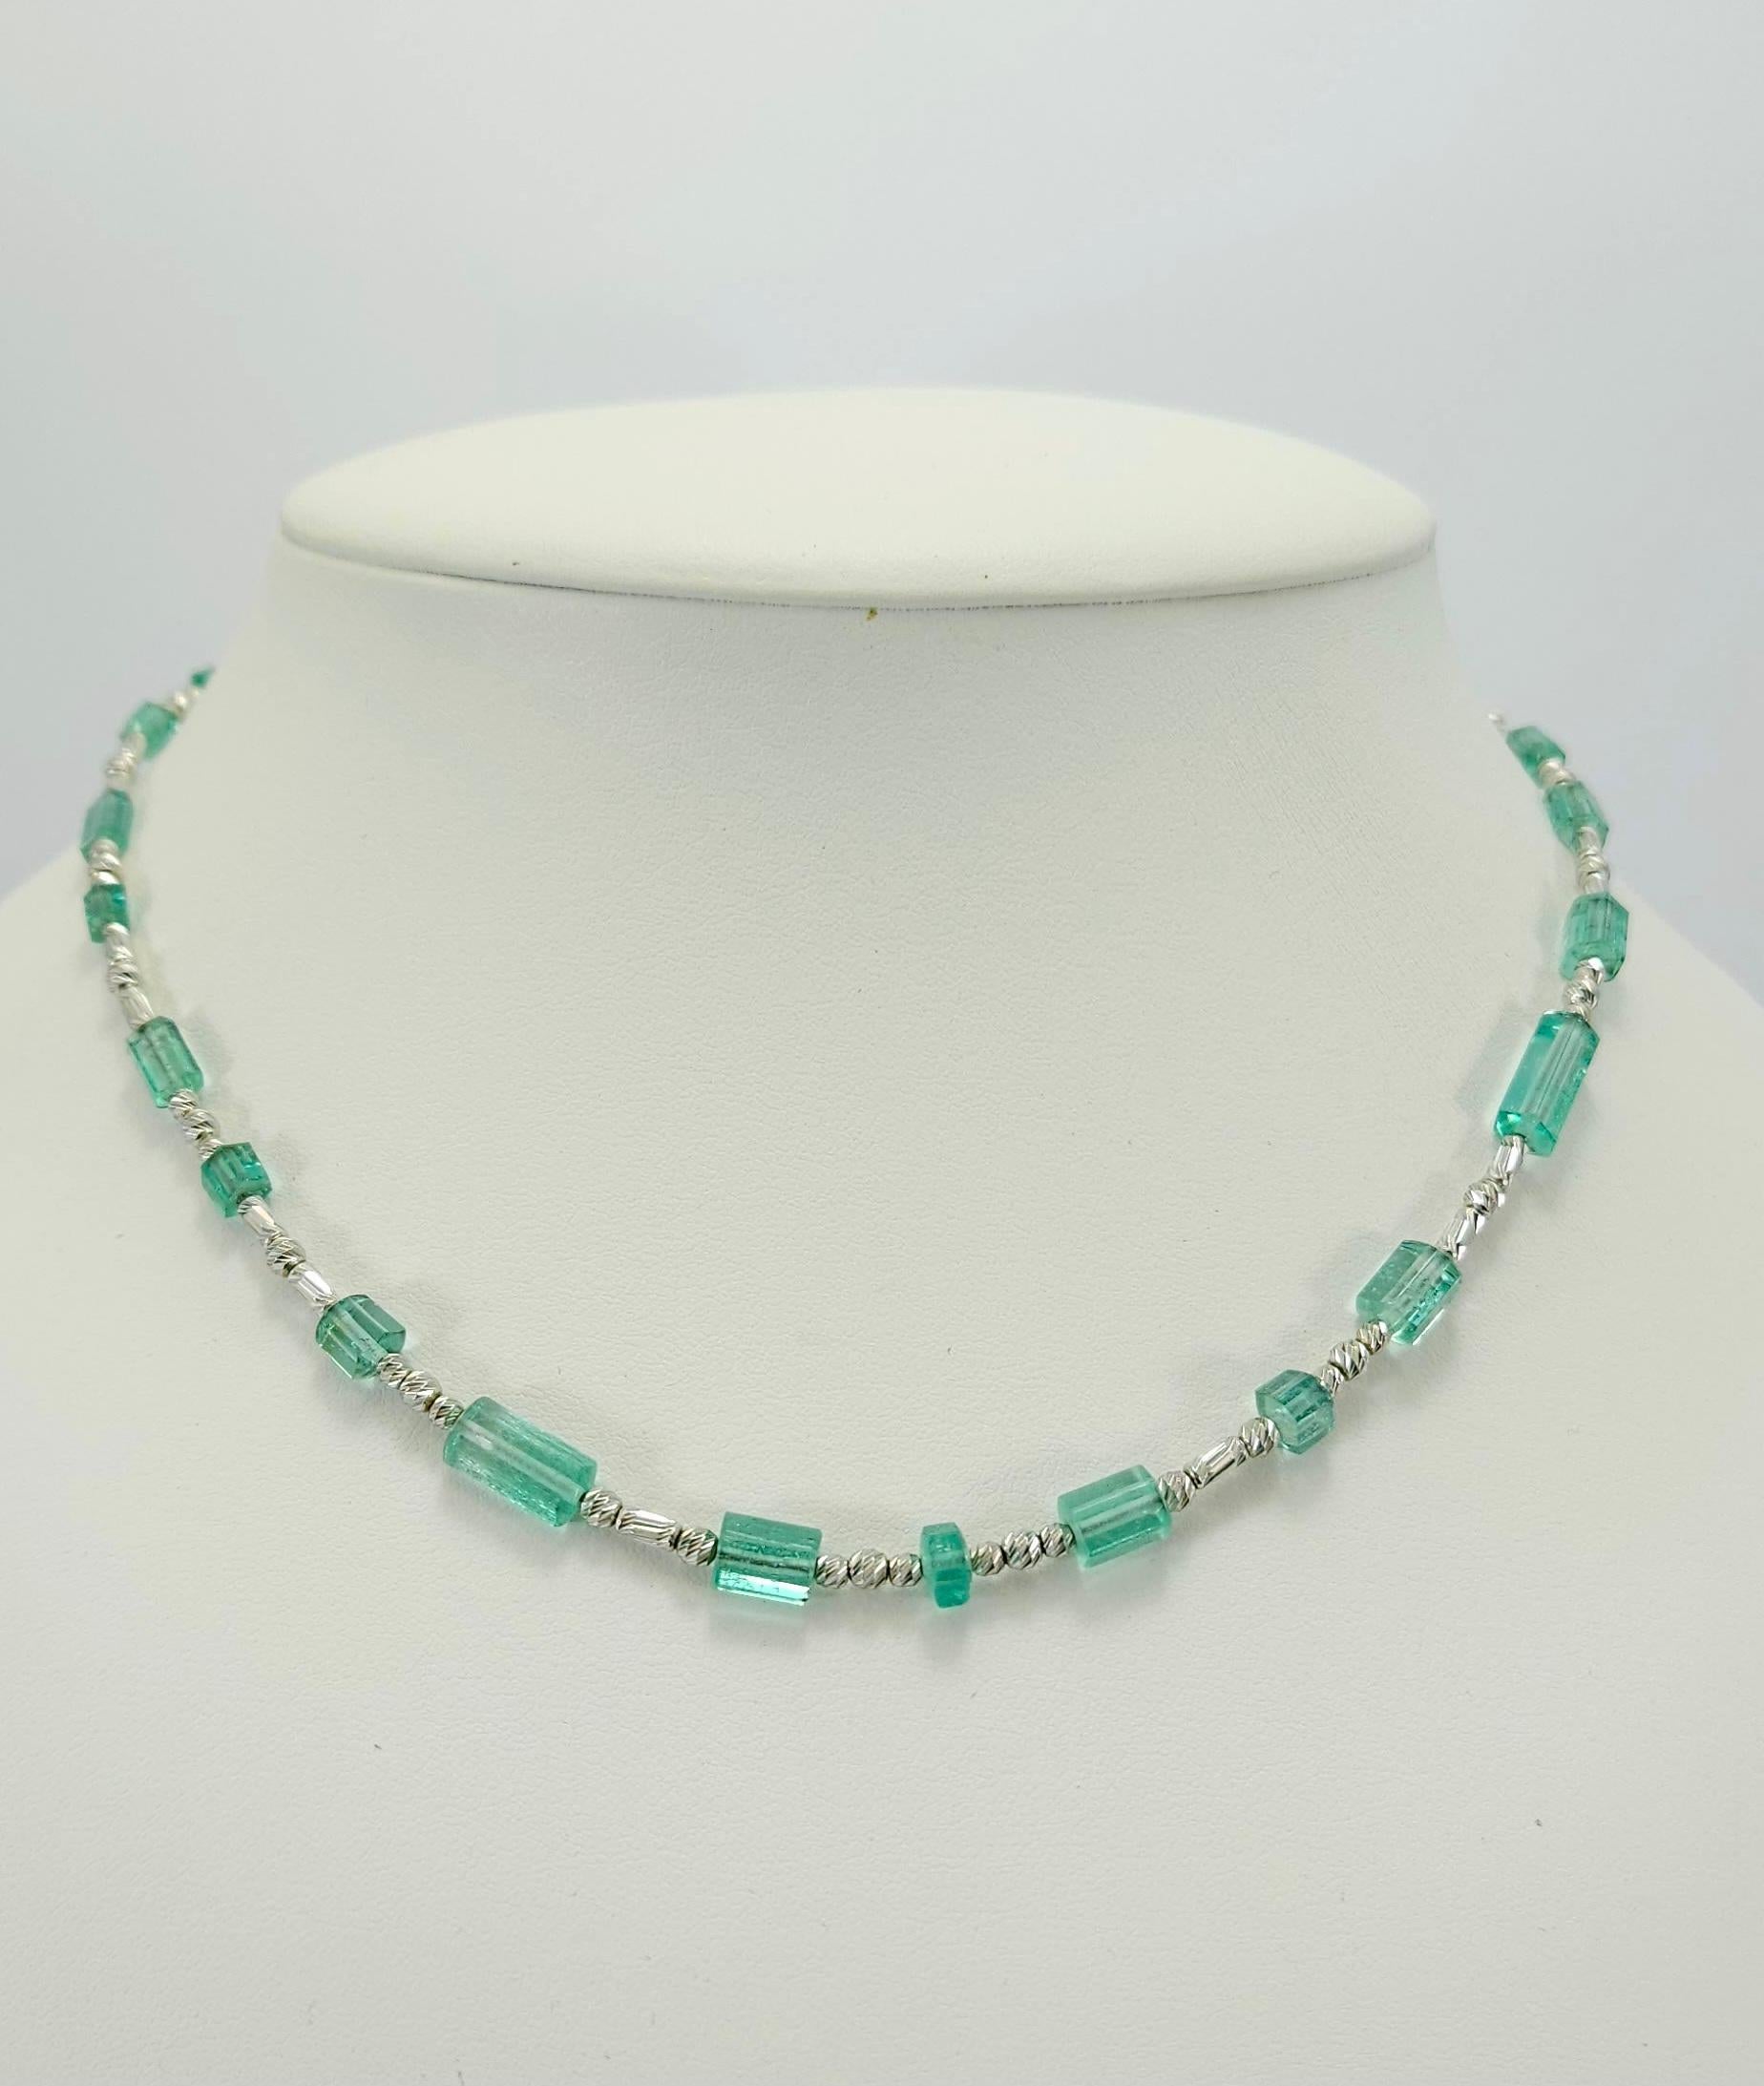 This natural Emerald Crystal Necklace with 18 Carat White Gold is handcut in German quality.
18kt hexagonl white gold clasp matchs perfectly to the natural crystal shape of the Emerald (green beryl).
The screw clasp is easy to handle and very